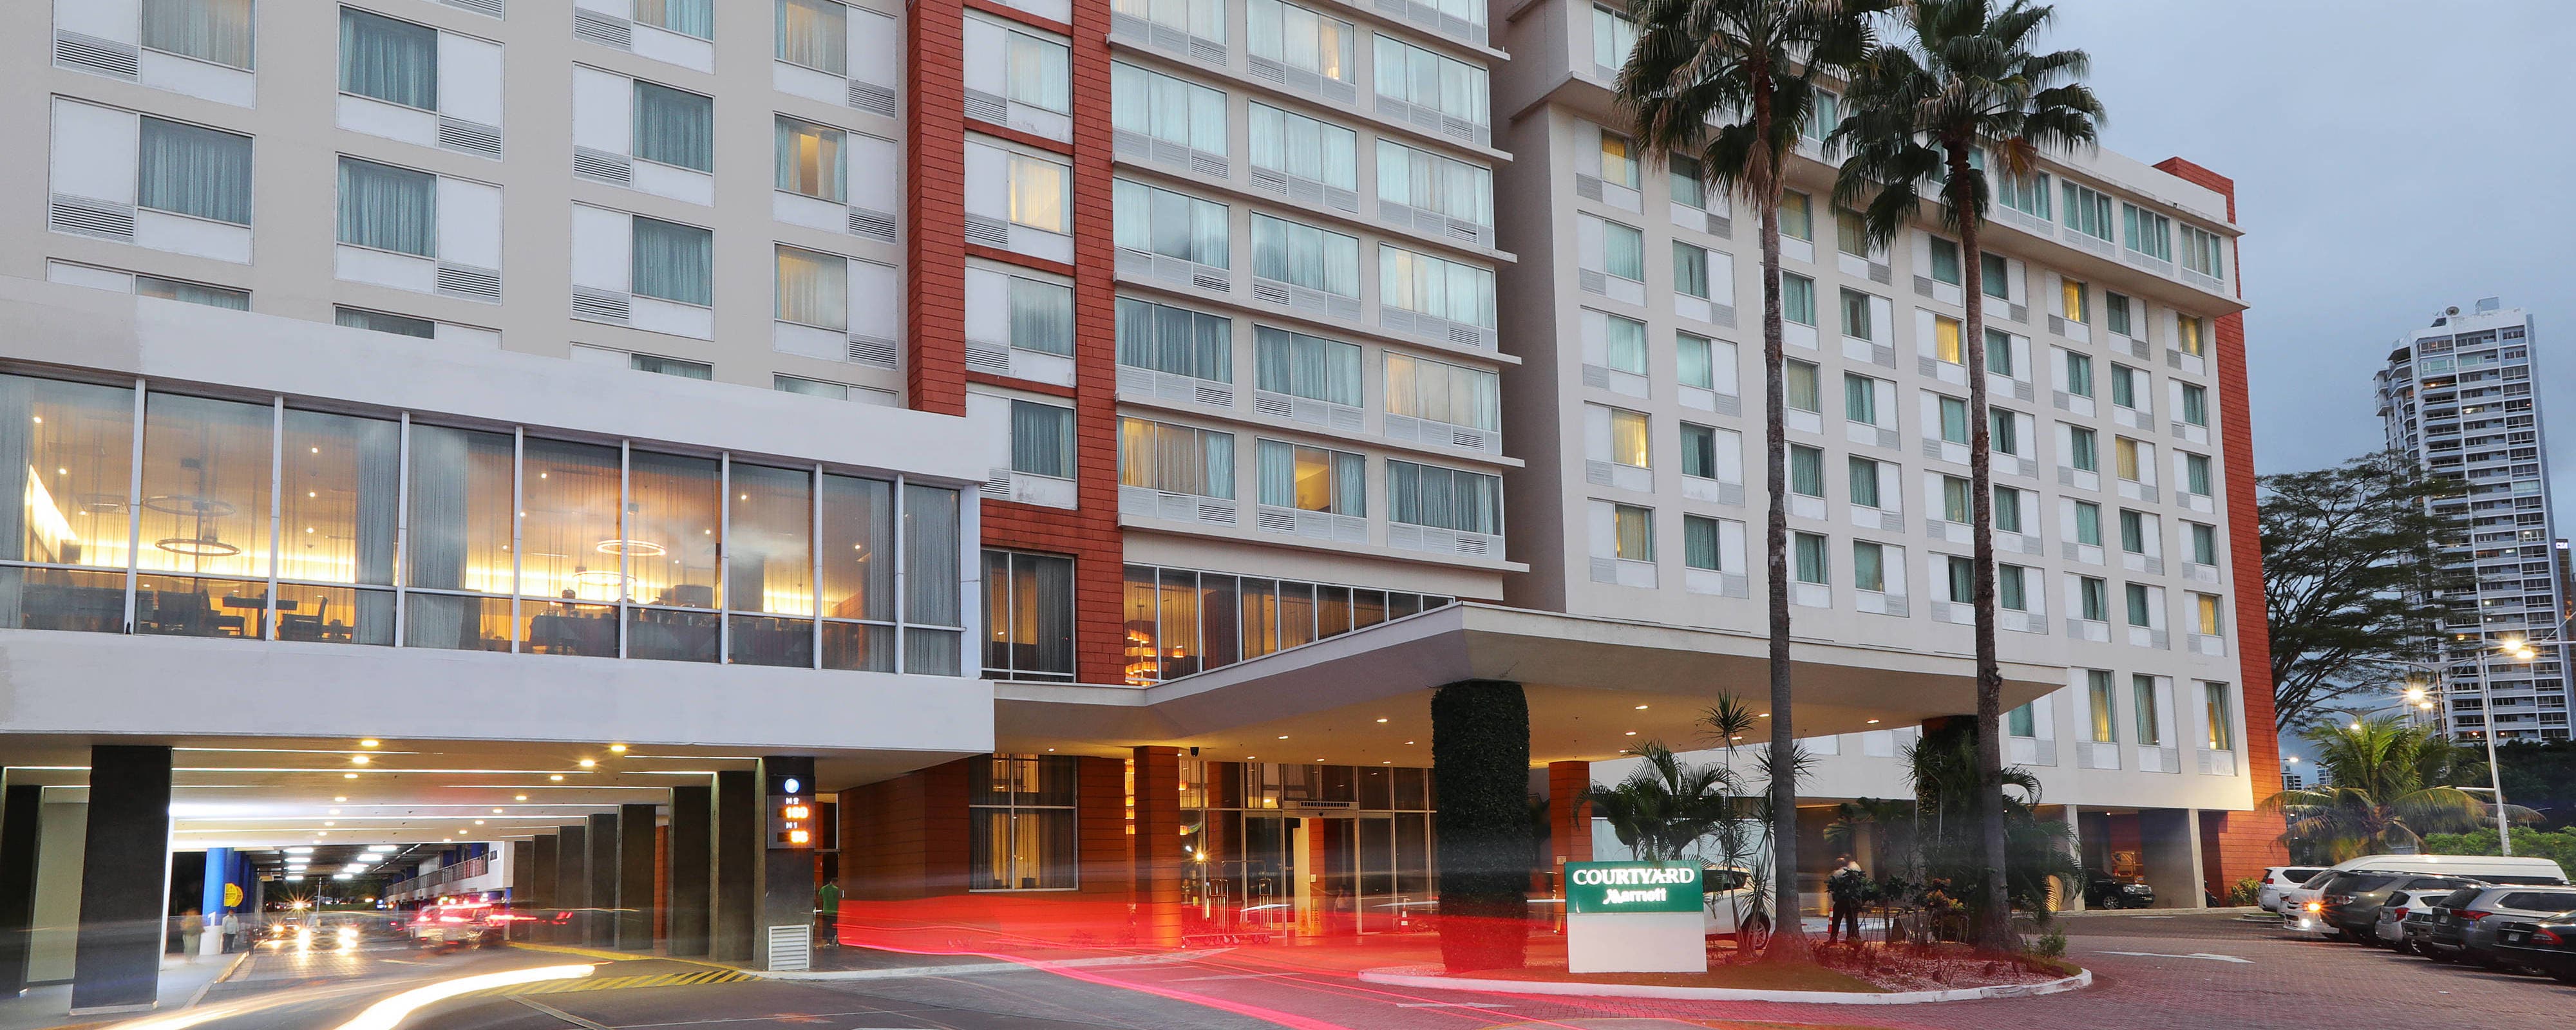 Image for Courtyard Panama Multiplaza Mall, a Marriott hotel.